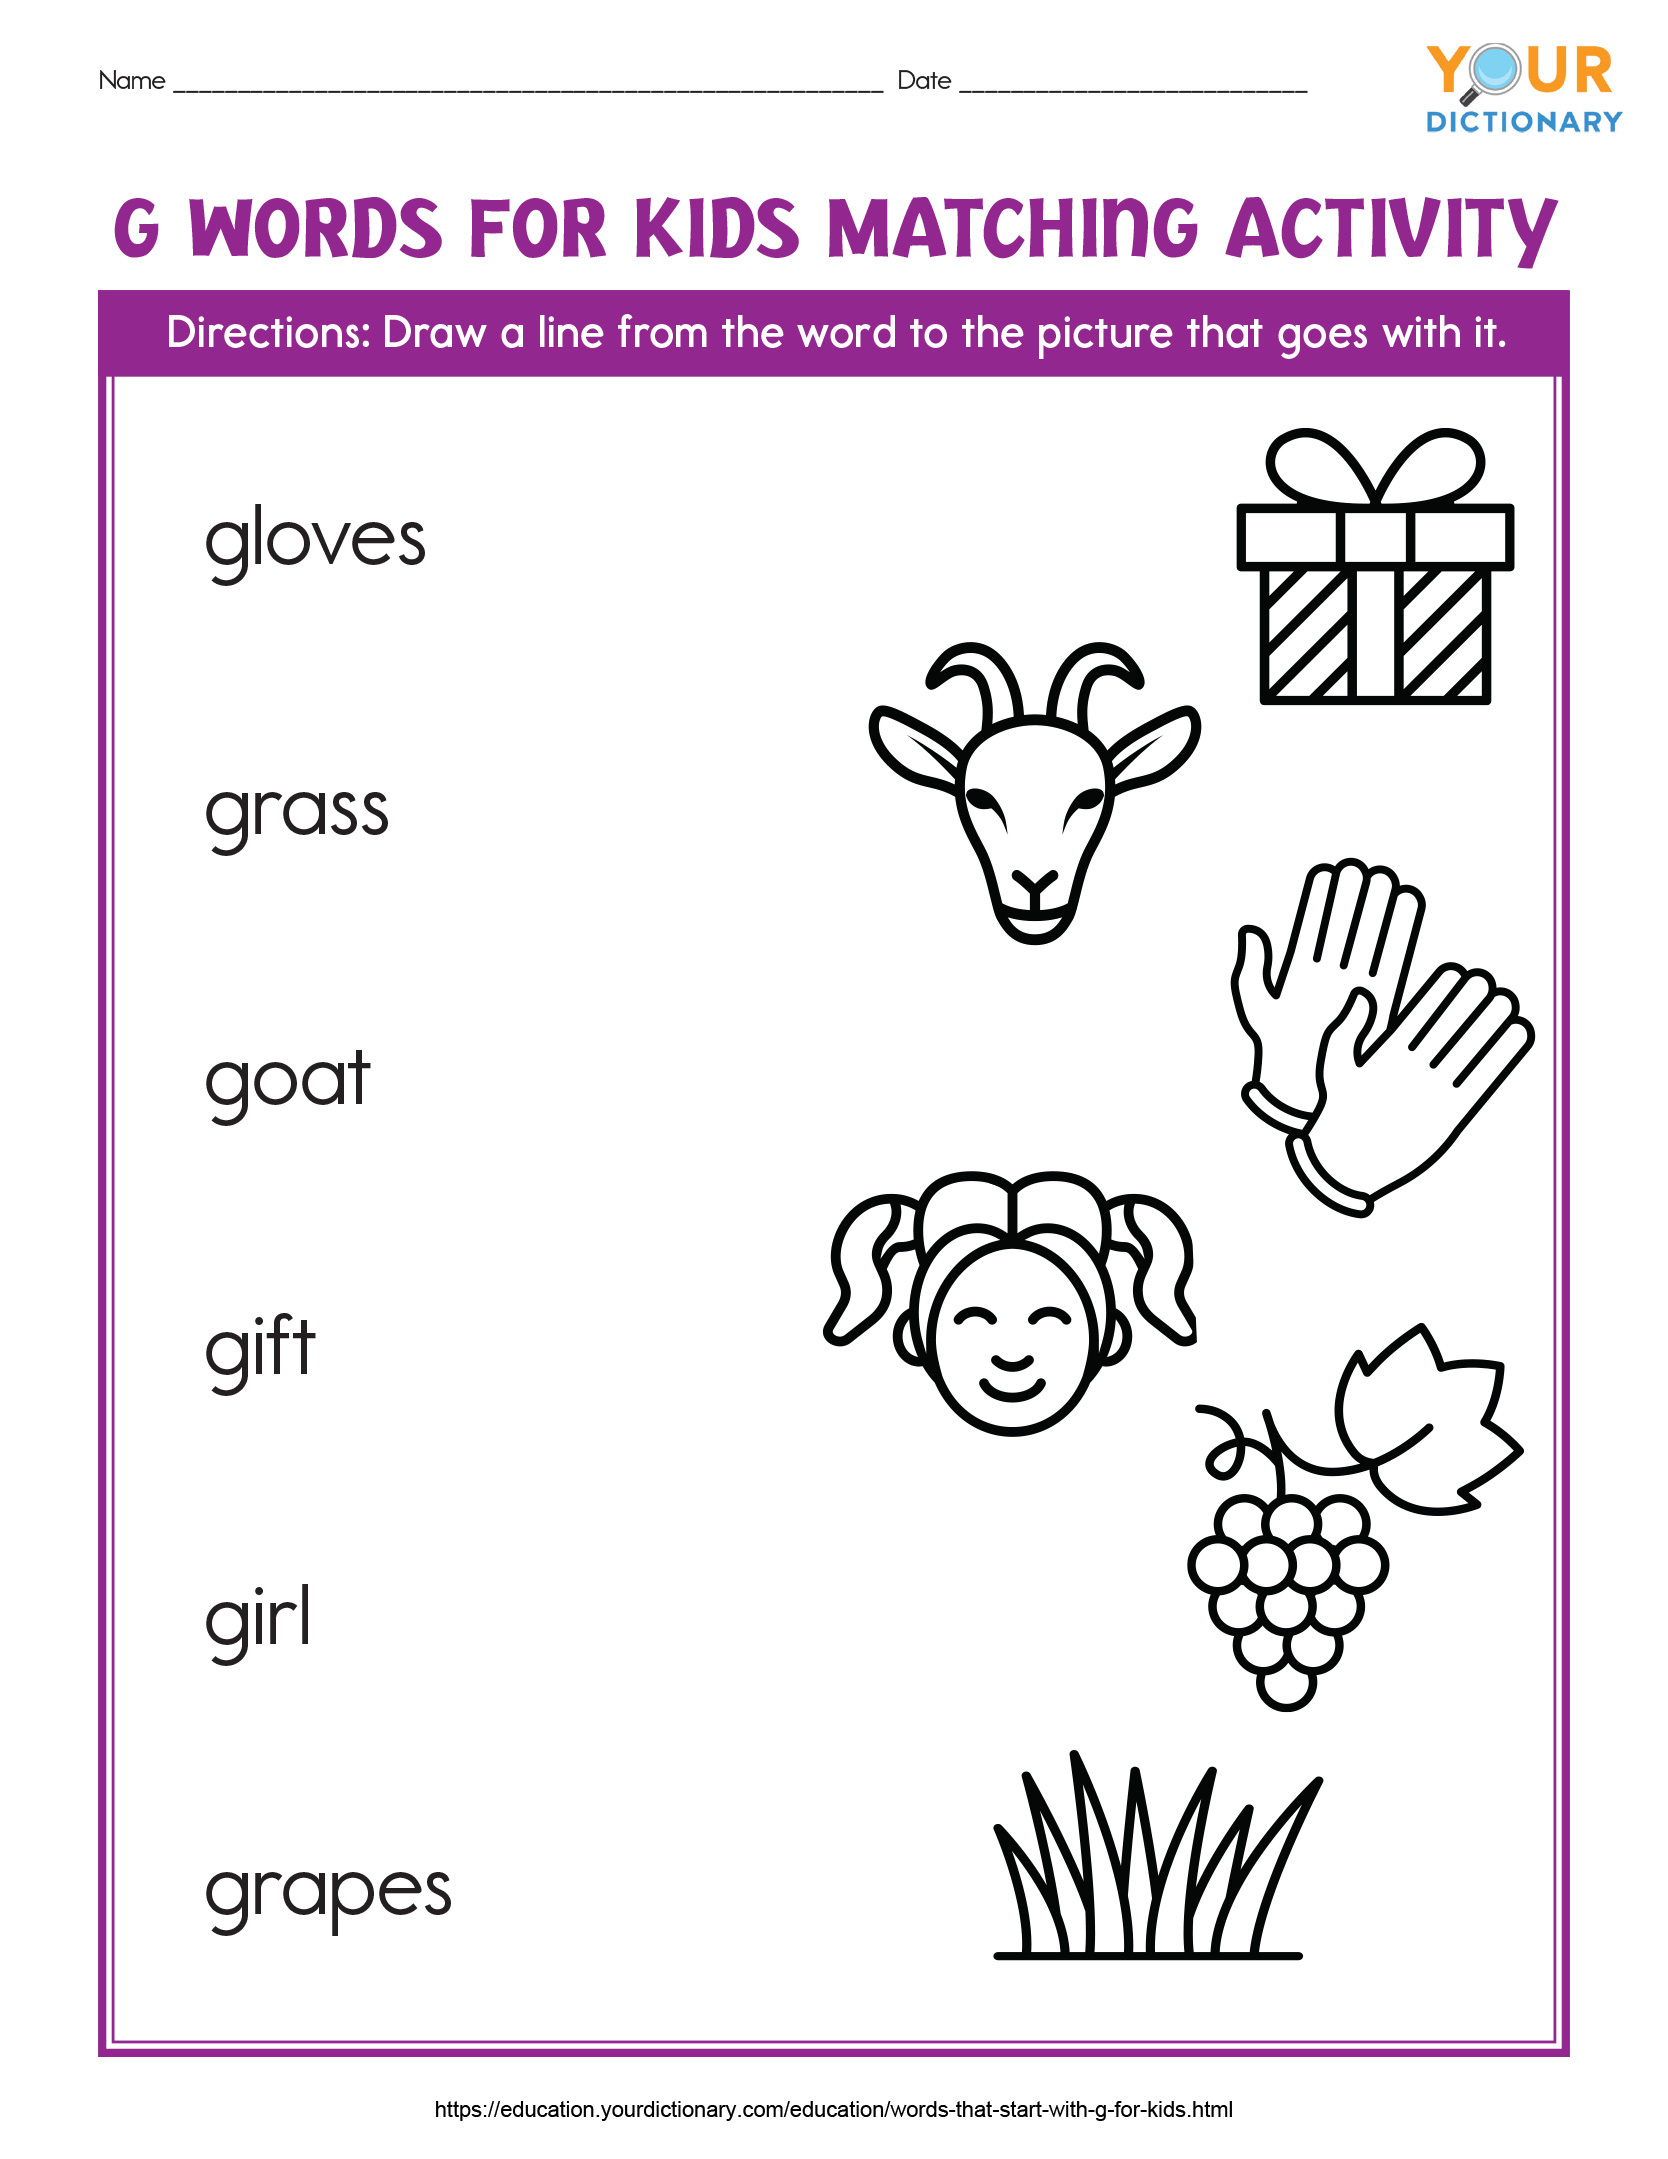 g words for kids matching activity printable